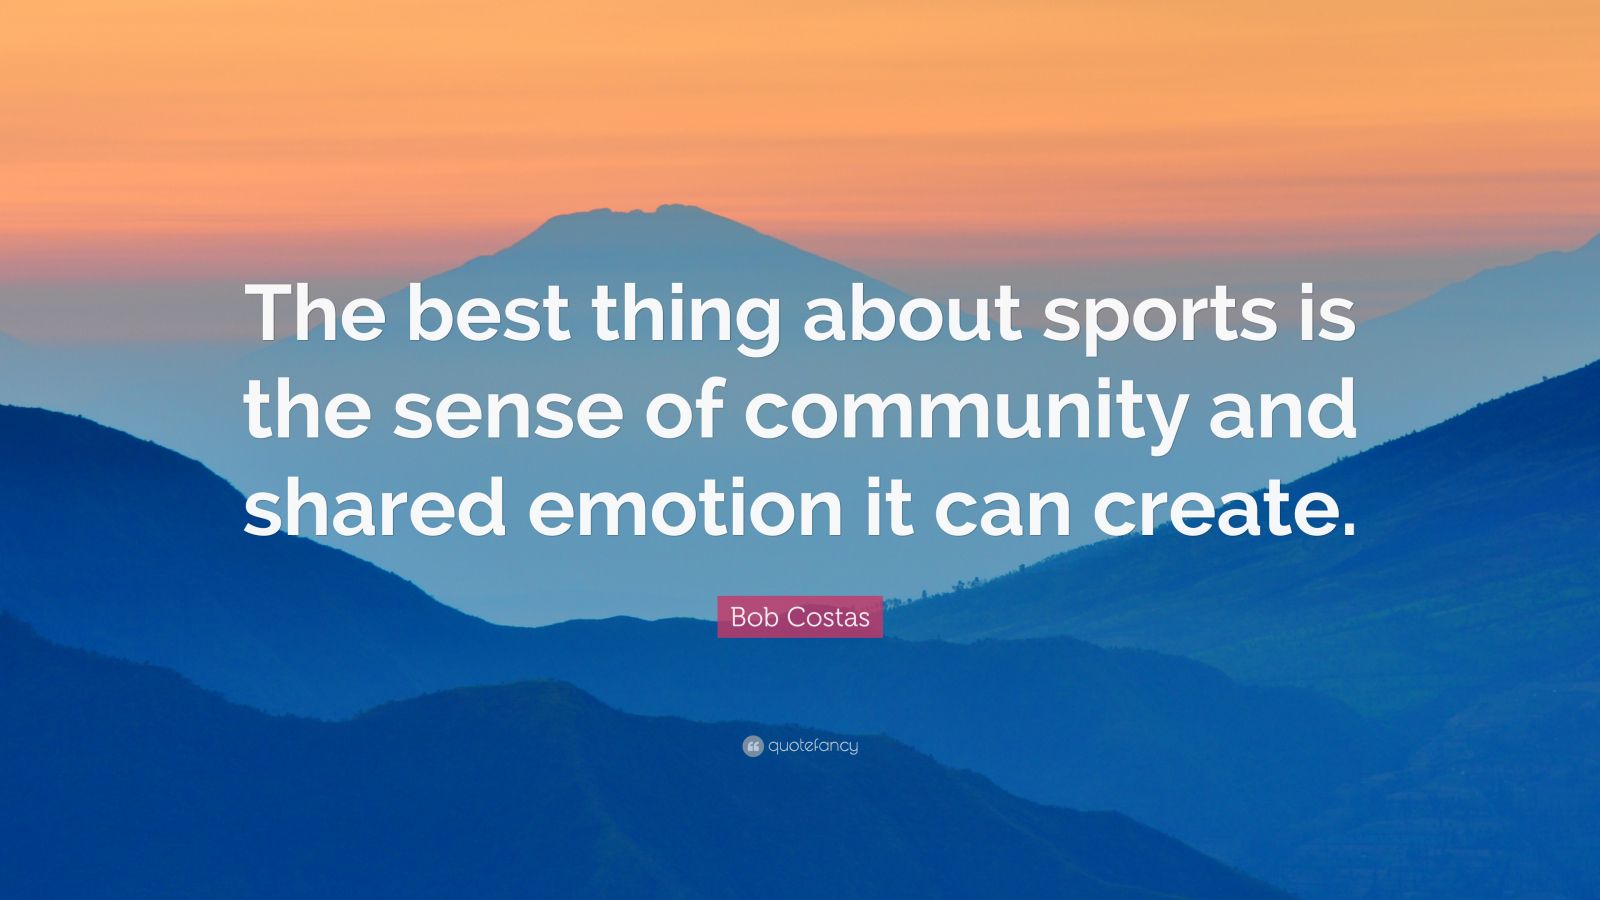 Bob Costas Quote: “The best thing about sports is the sense of ...